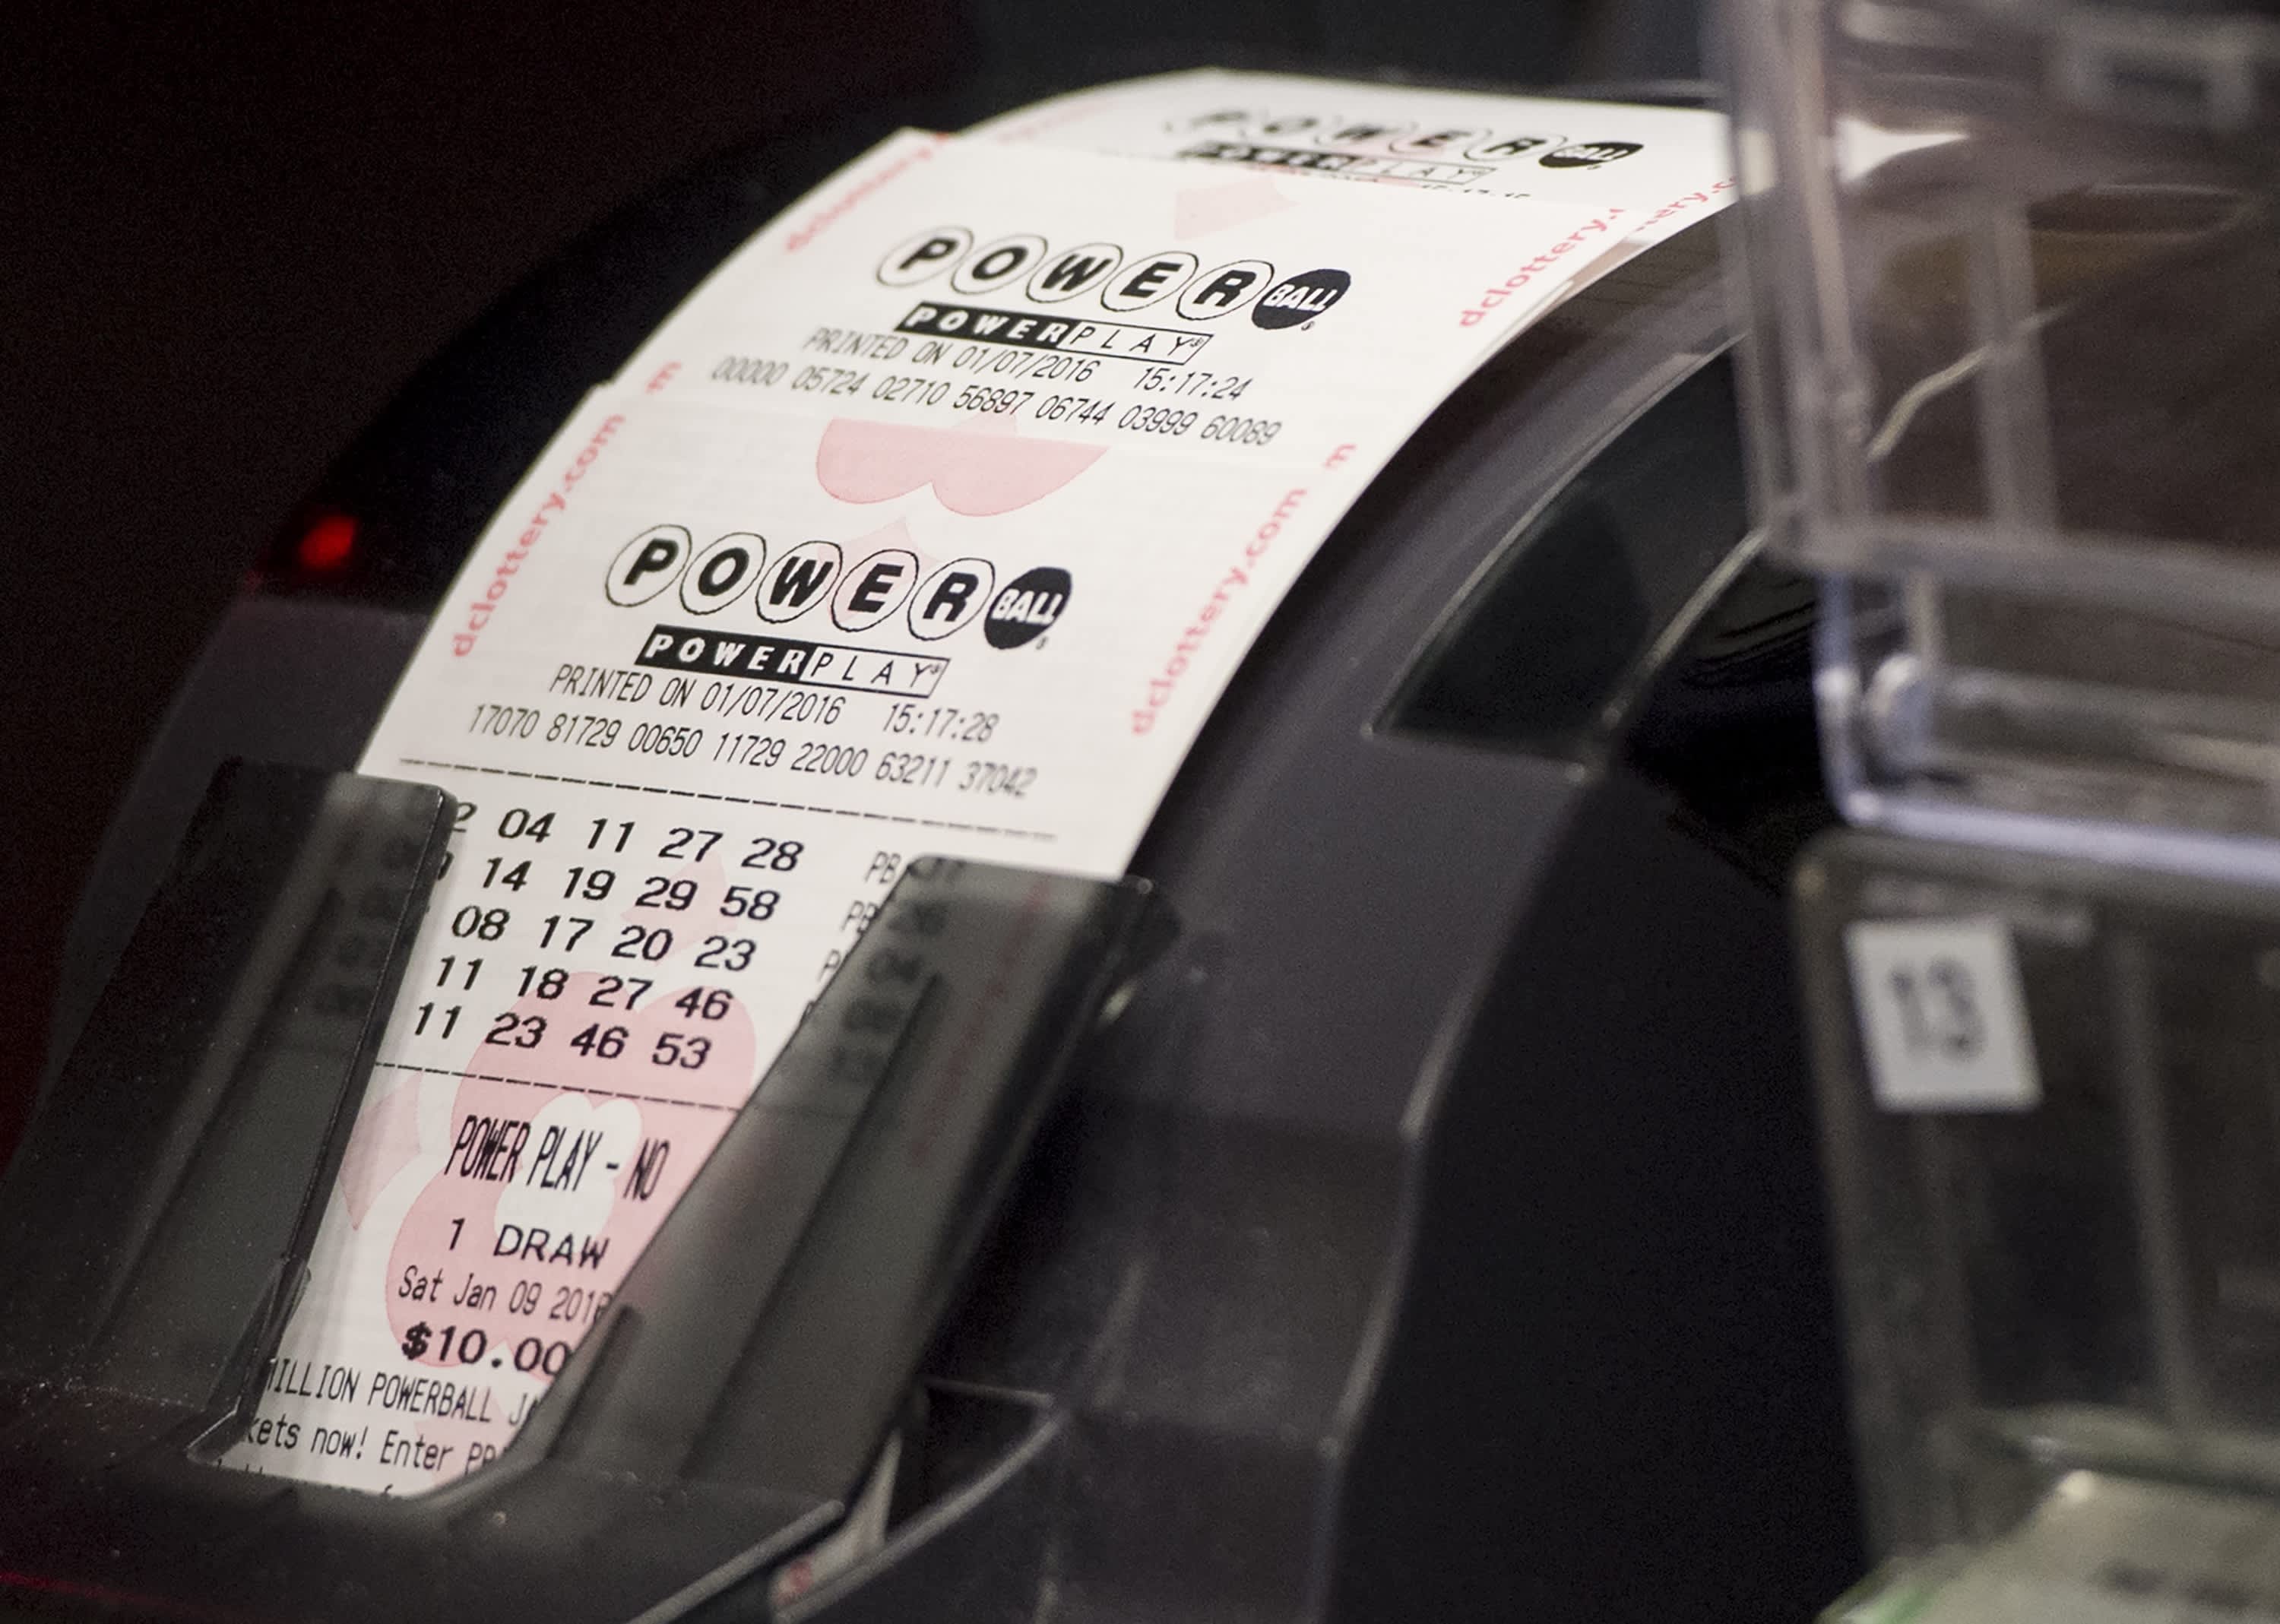 Powerball’s top prize jumps to $500 million for the first drawing of 2022. This year winners landed jackpots totaling $2 billion – CNBC